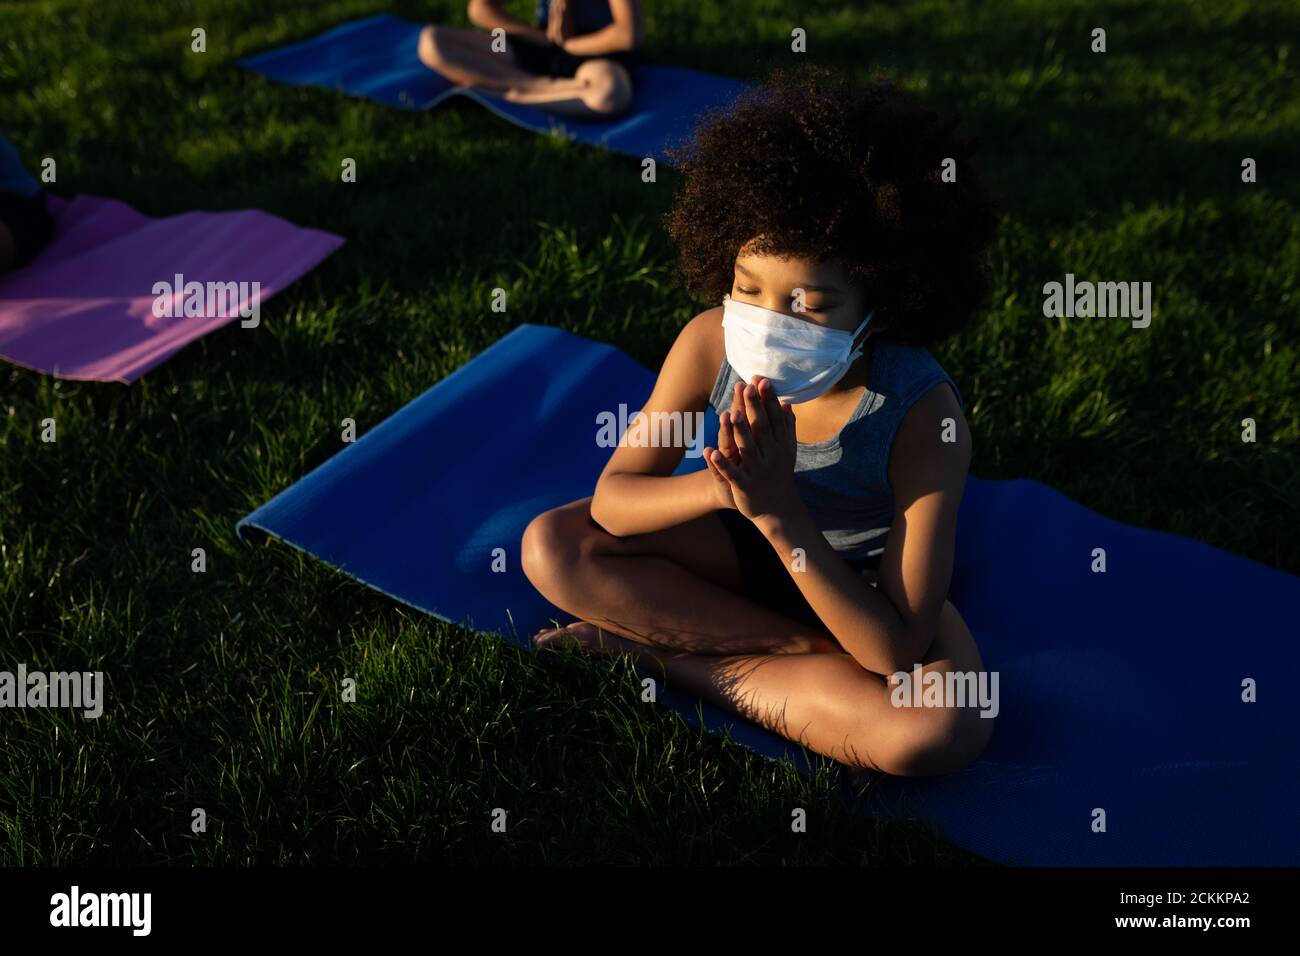 Overhead view of boy wearing face mask performing yoga in the garden Stock Photo